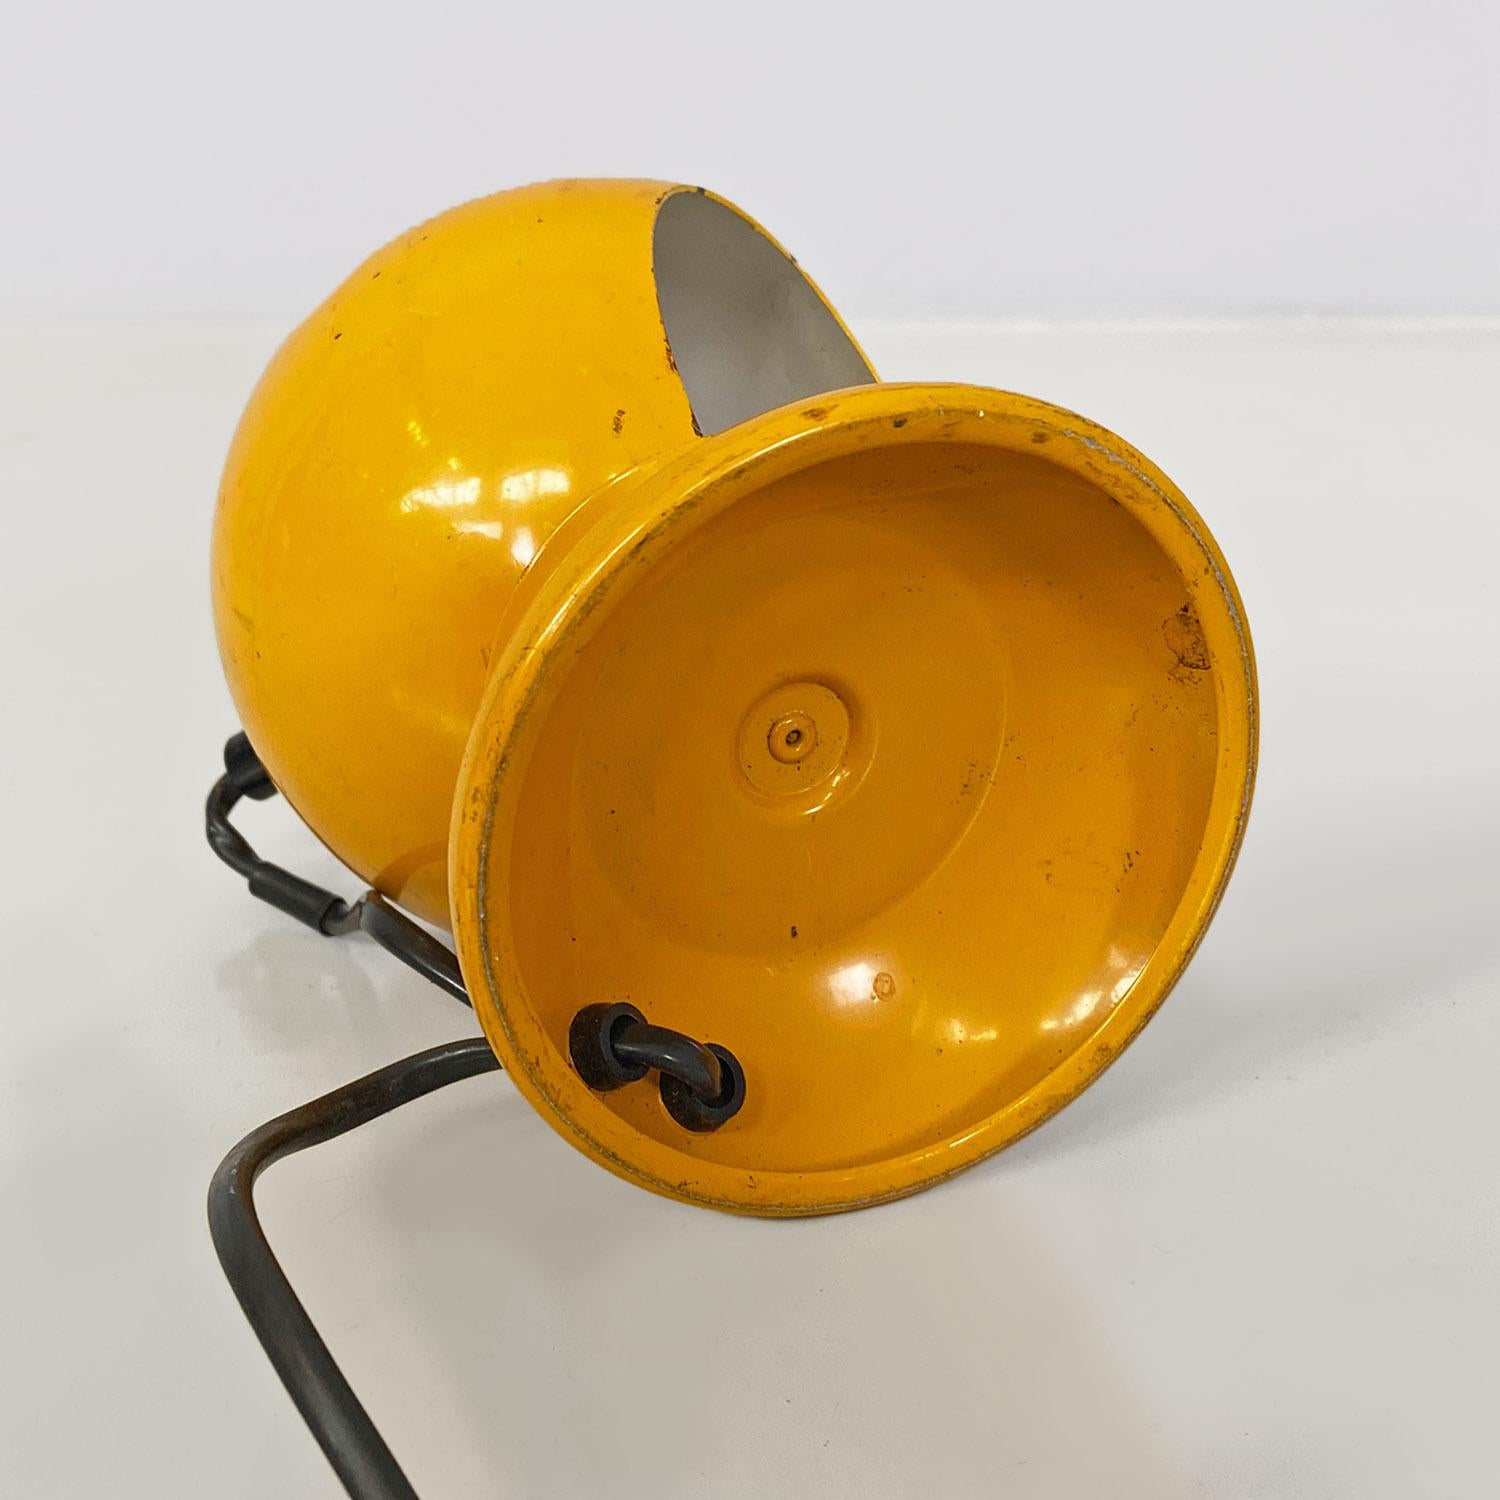 Italian modern yellow metal table lamps or applique by Goffredo Reggiani, 1970s For Sale 8